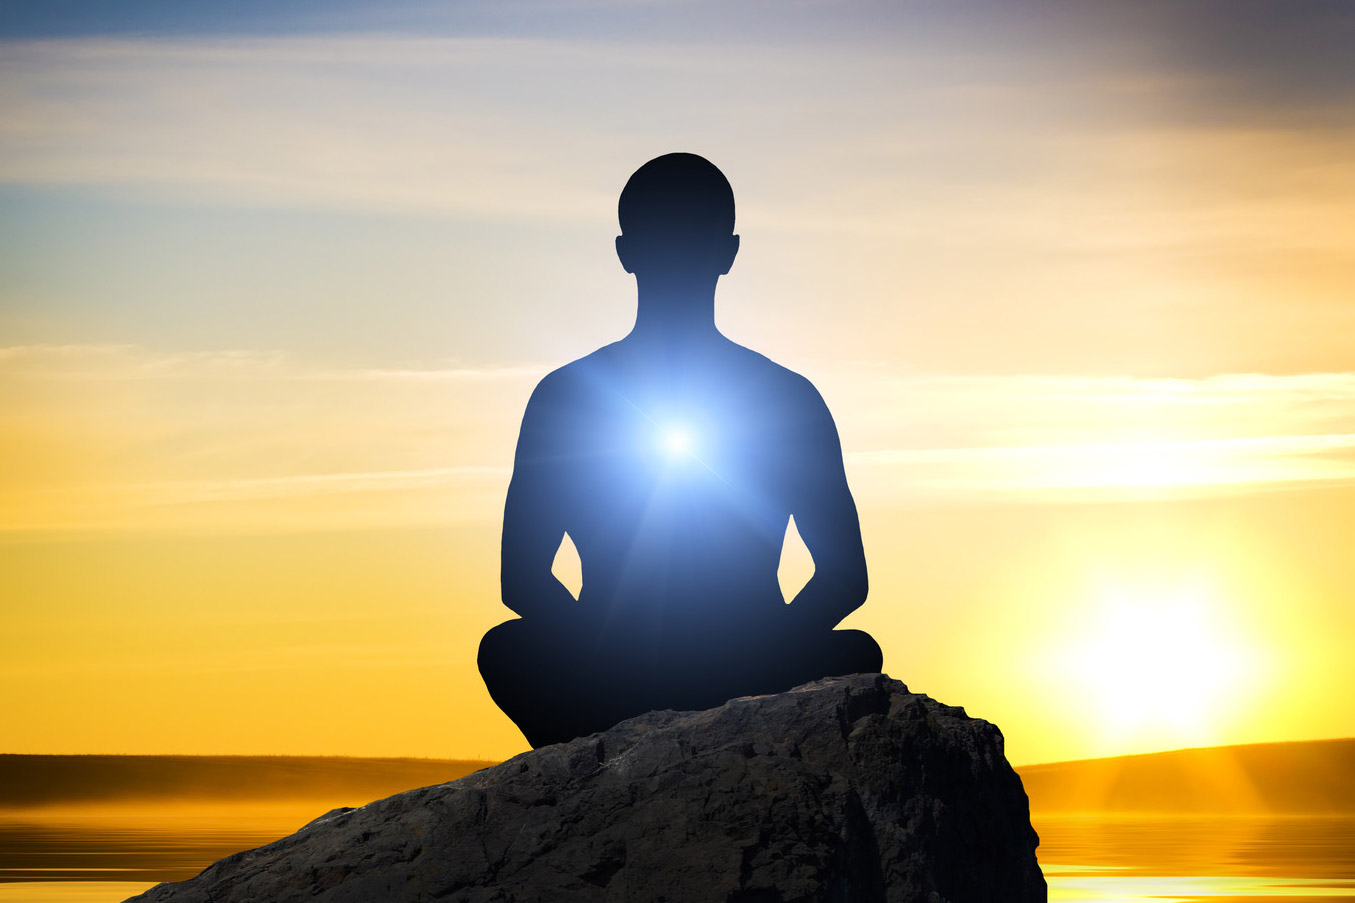 A person sits on a rock at sunrise, a bright light emanates from the center of their chest representing personal resiliency